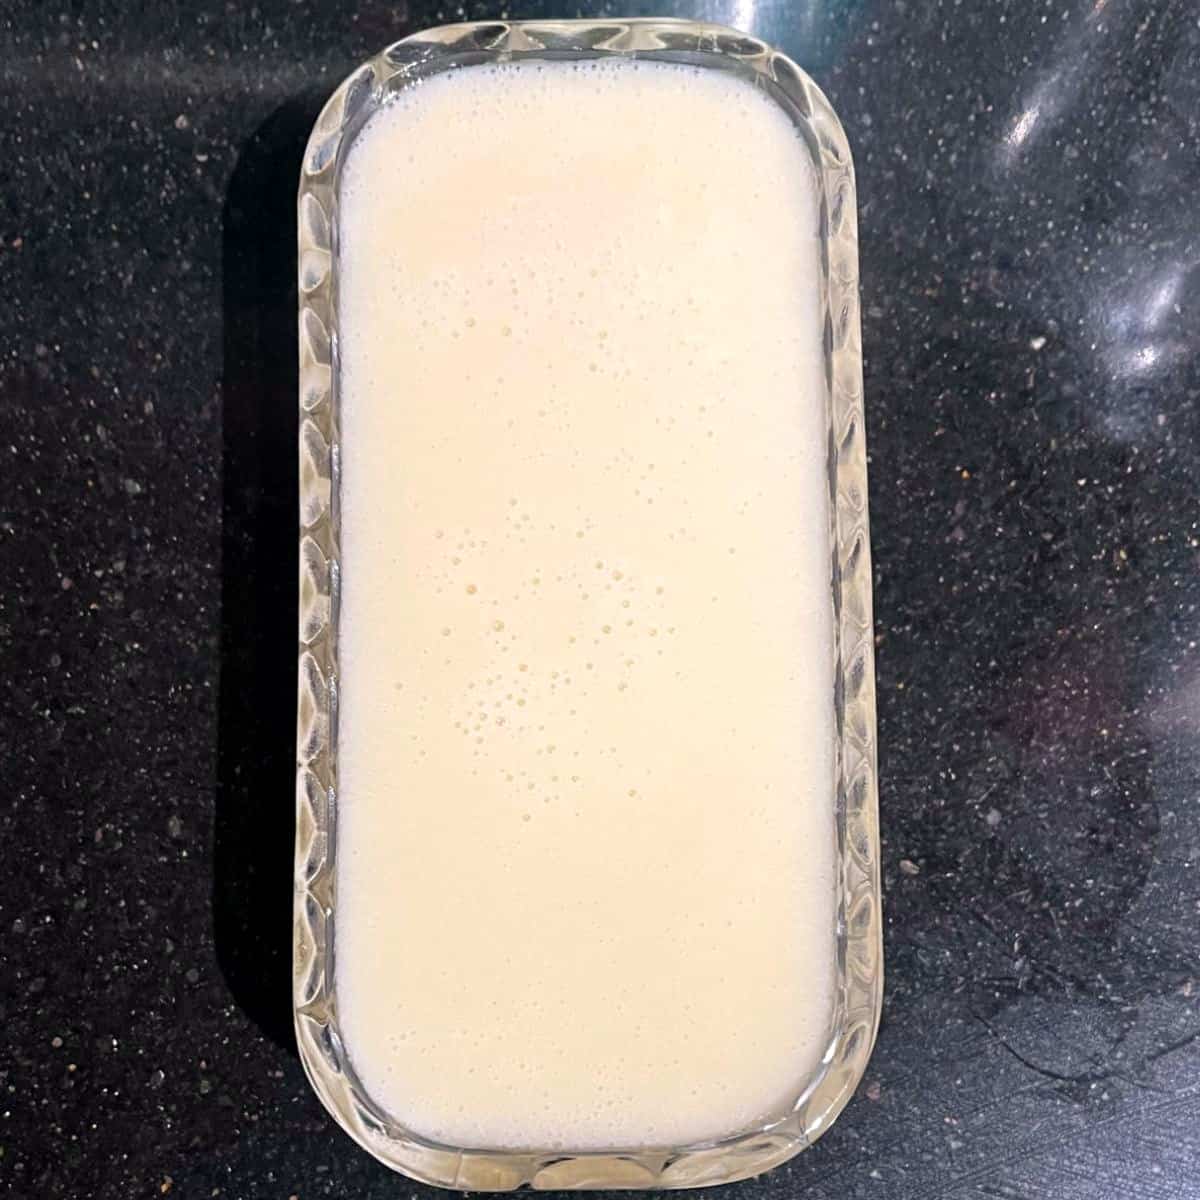 Vegan spreadable butter poured in butter dish.